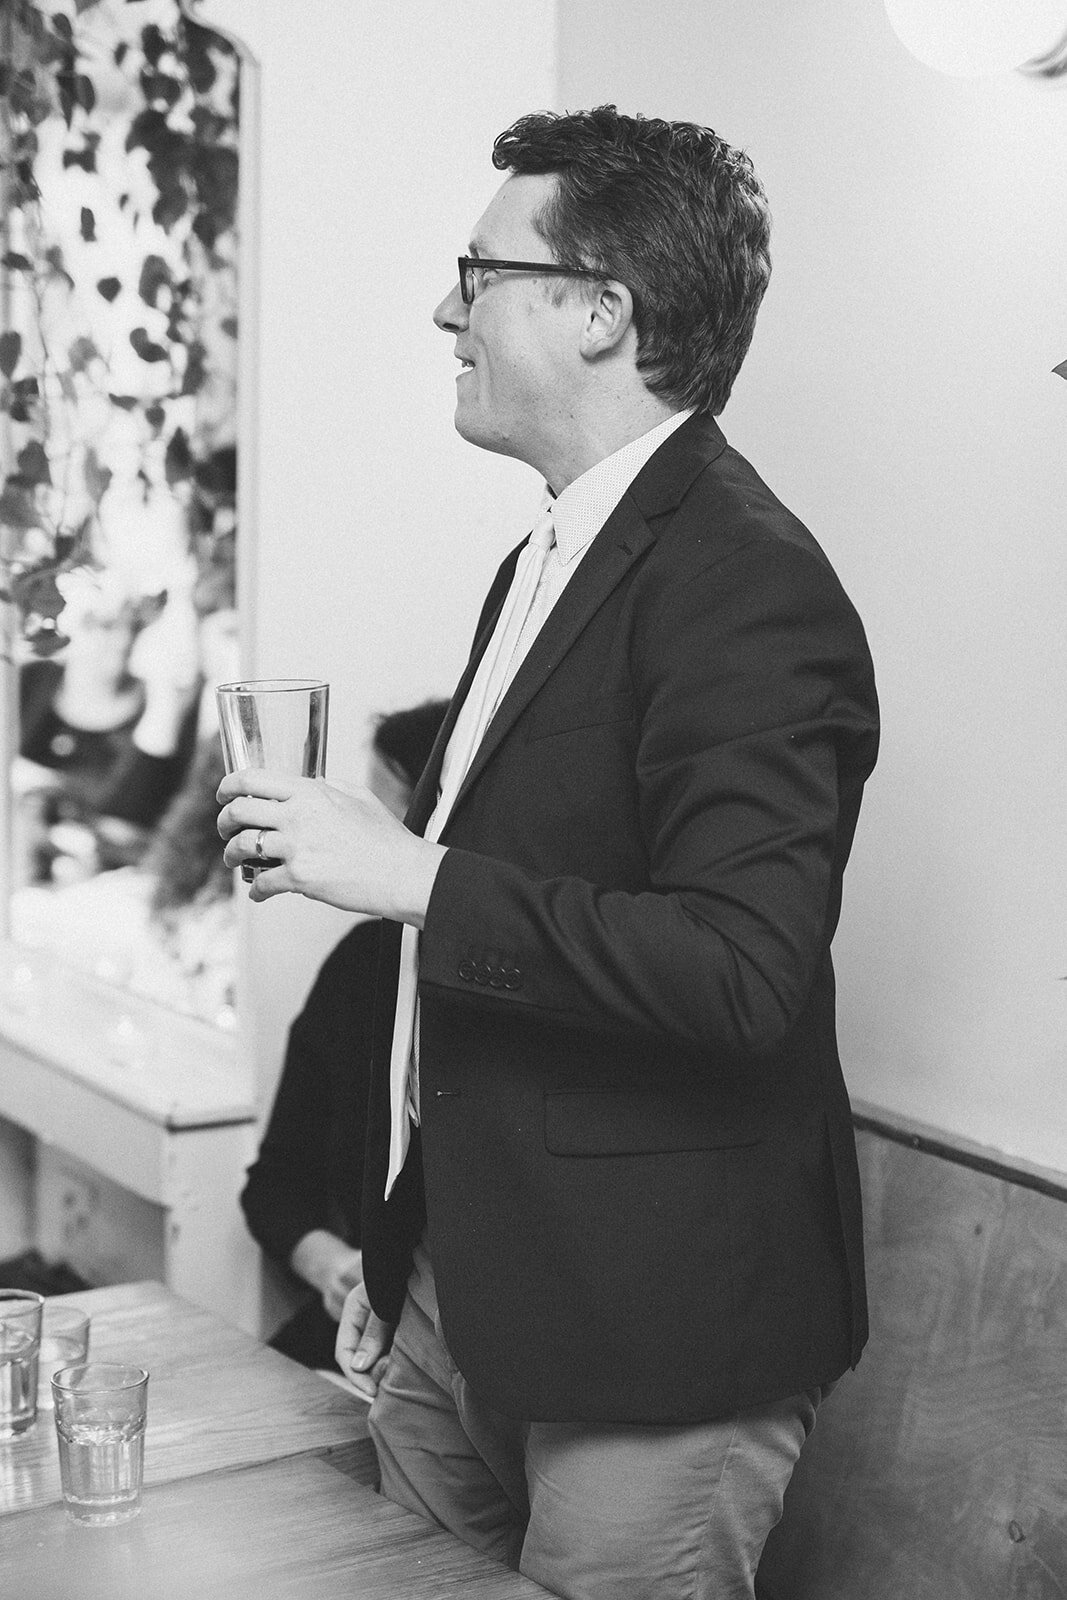 Wedding guest with a glass at reception in Philadelphia PA Shawnee Custalow Queer Wedding photography